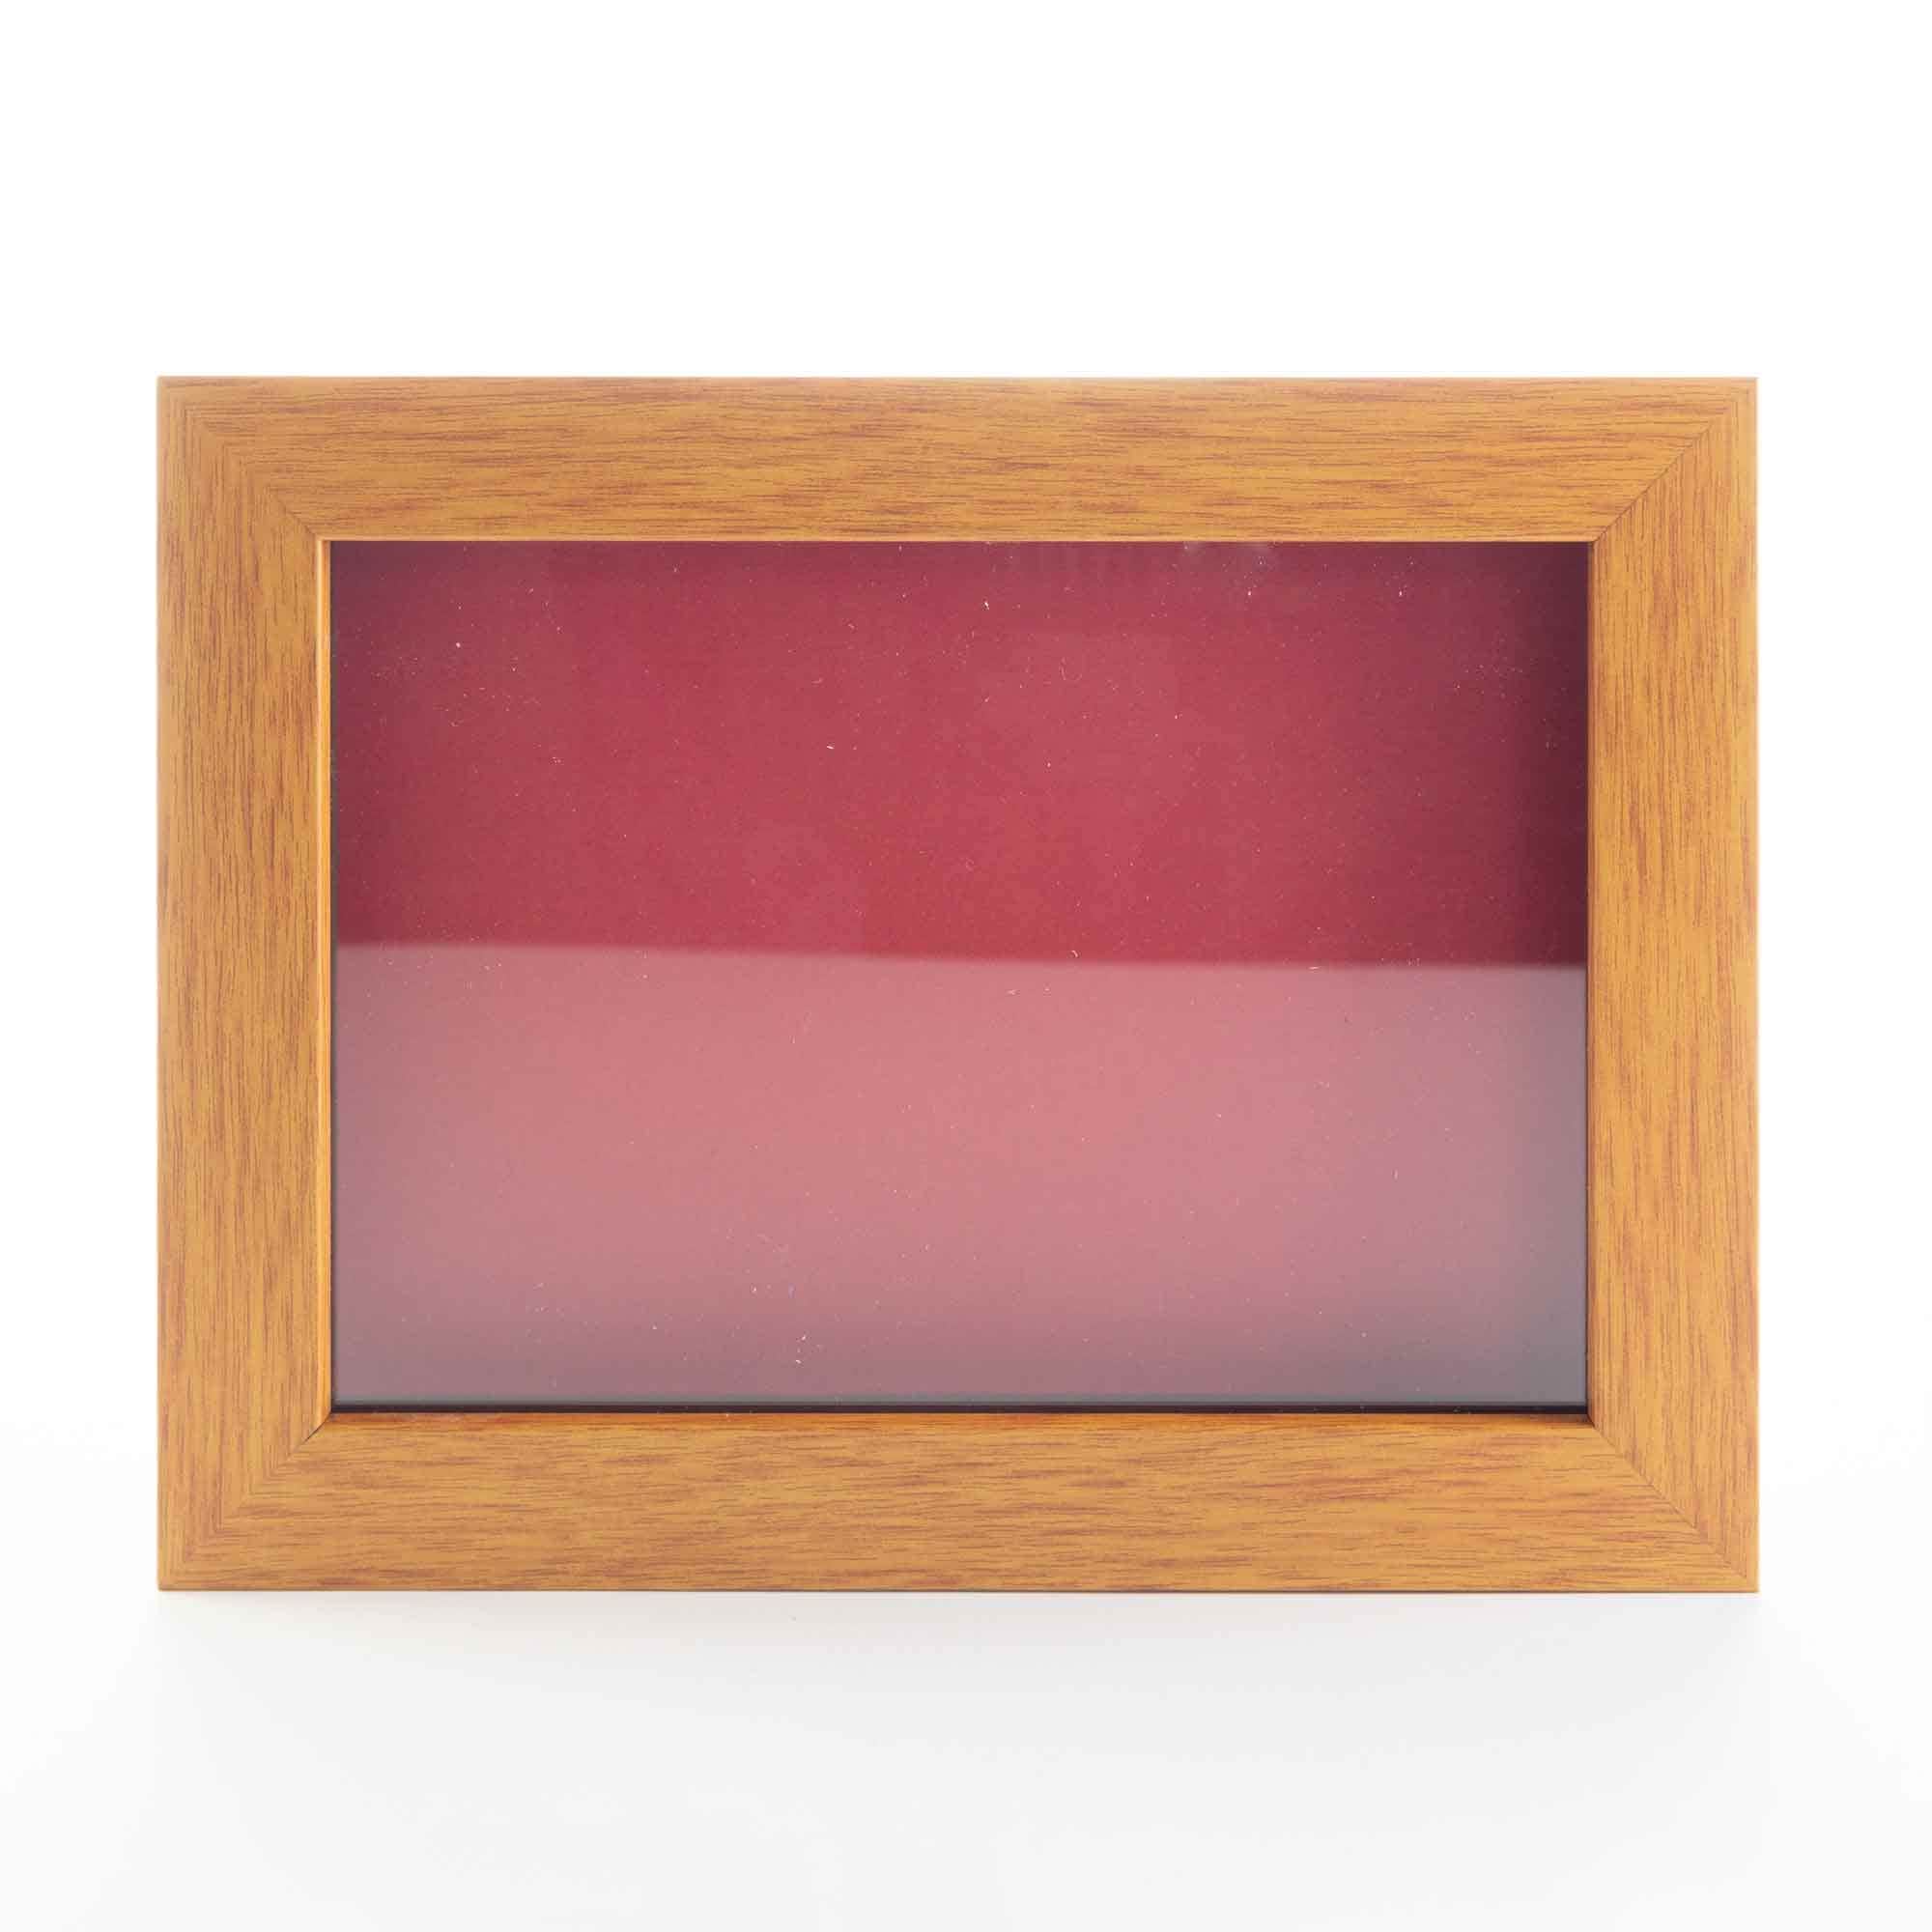 8x8 Shadow Box Frame Light Real Wood with a White Acid-Free Backing, 3/4  of Usuable Depth